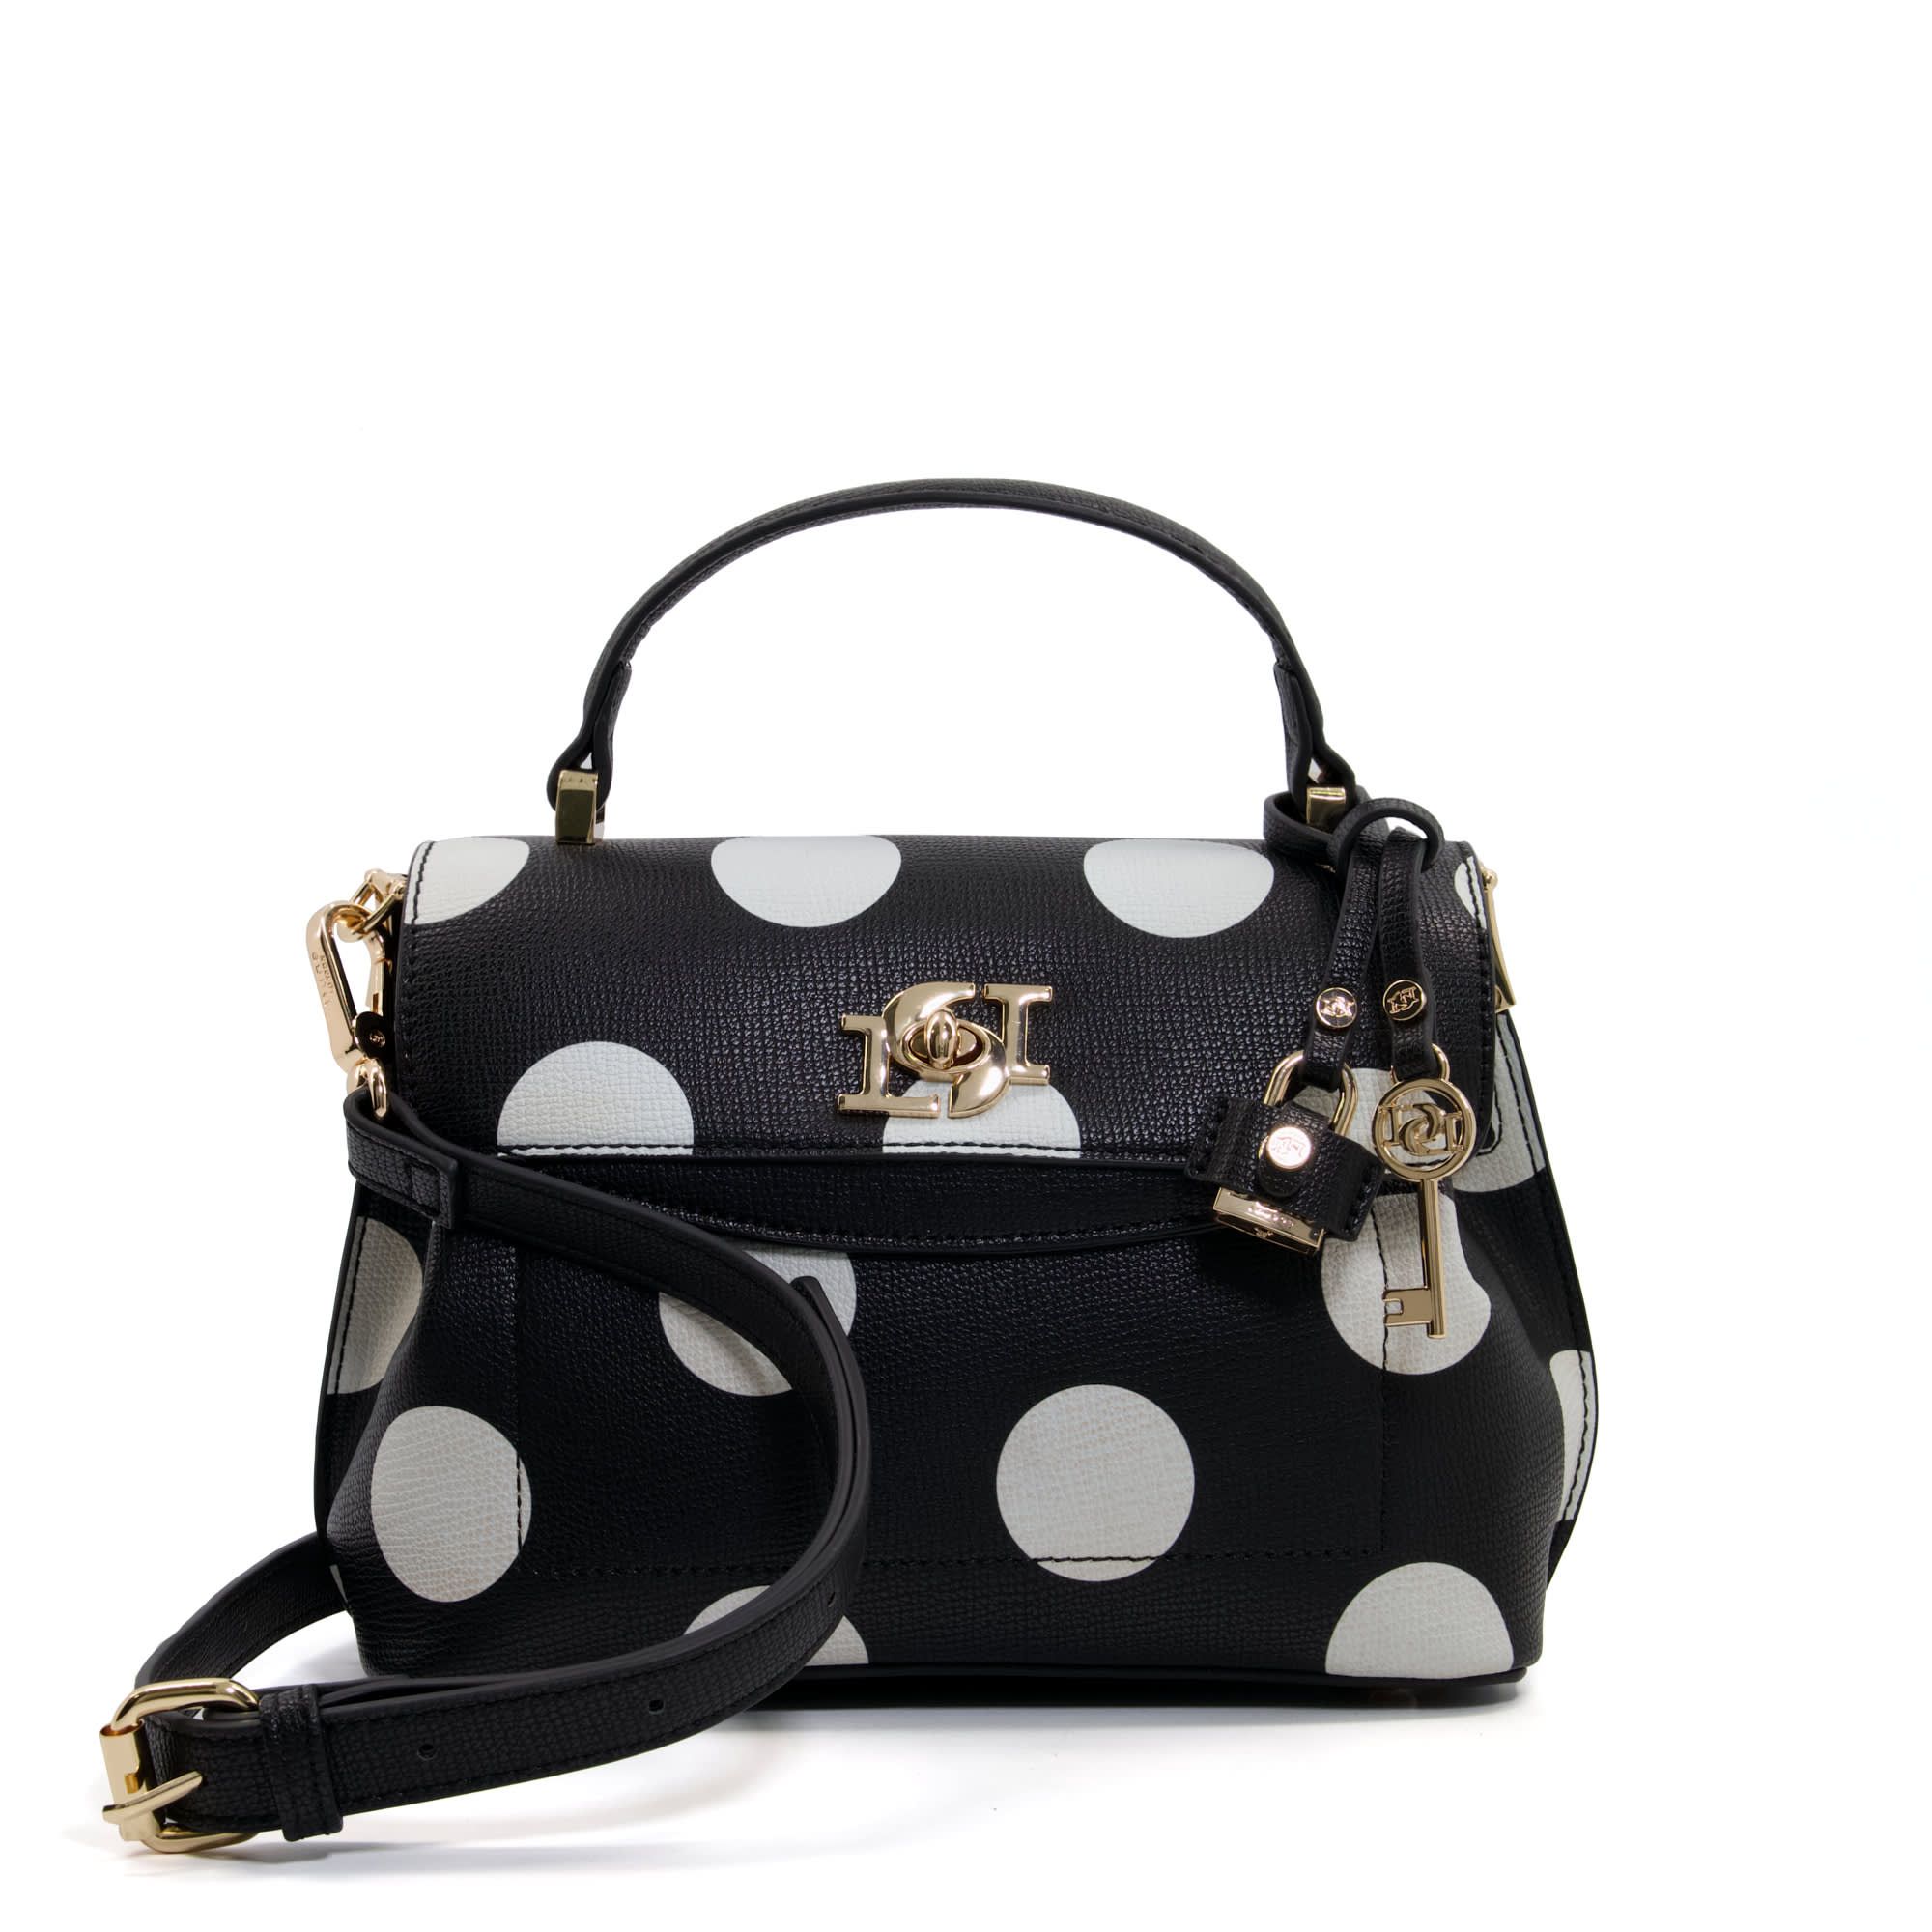 A timeless take on the polka-dot trend, this cross-body style has a classic monochrome pattern. Luxurious and feminine, it's designed with gold hardware, a chic top handle and a slim, adjustable strap.